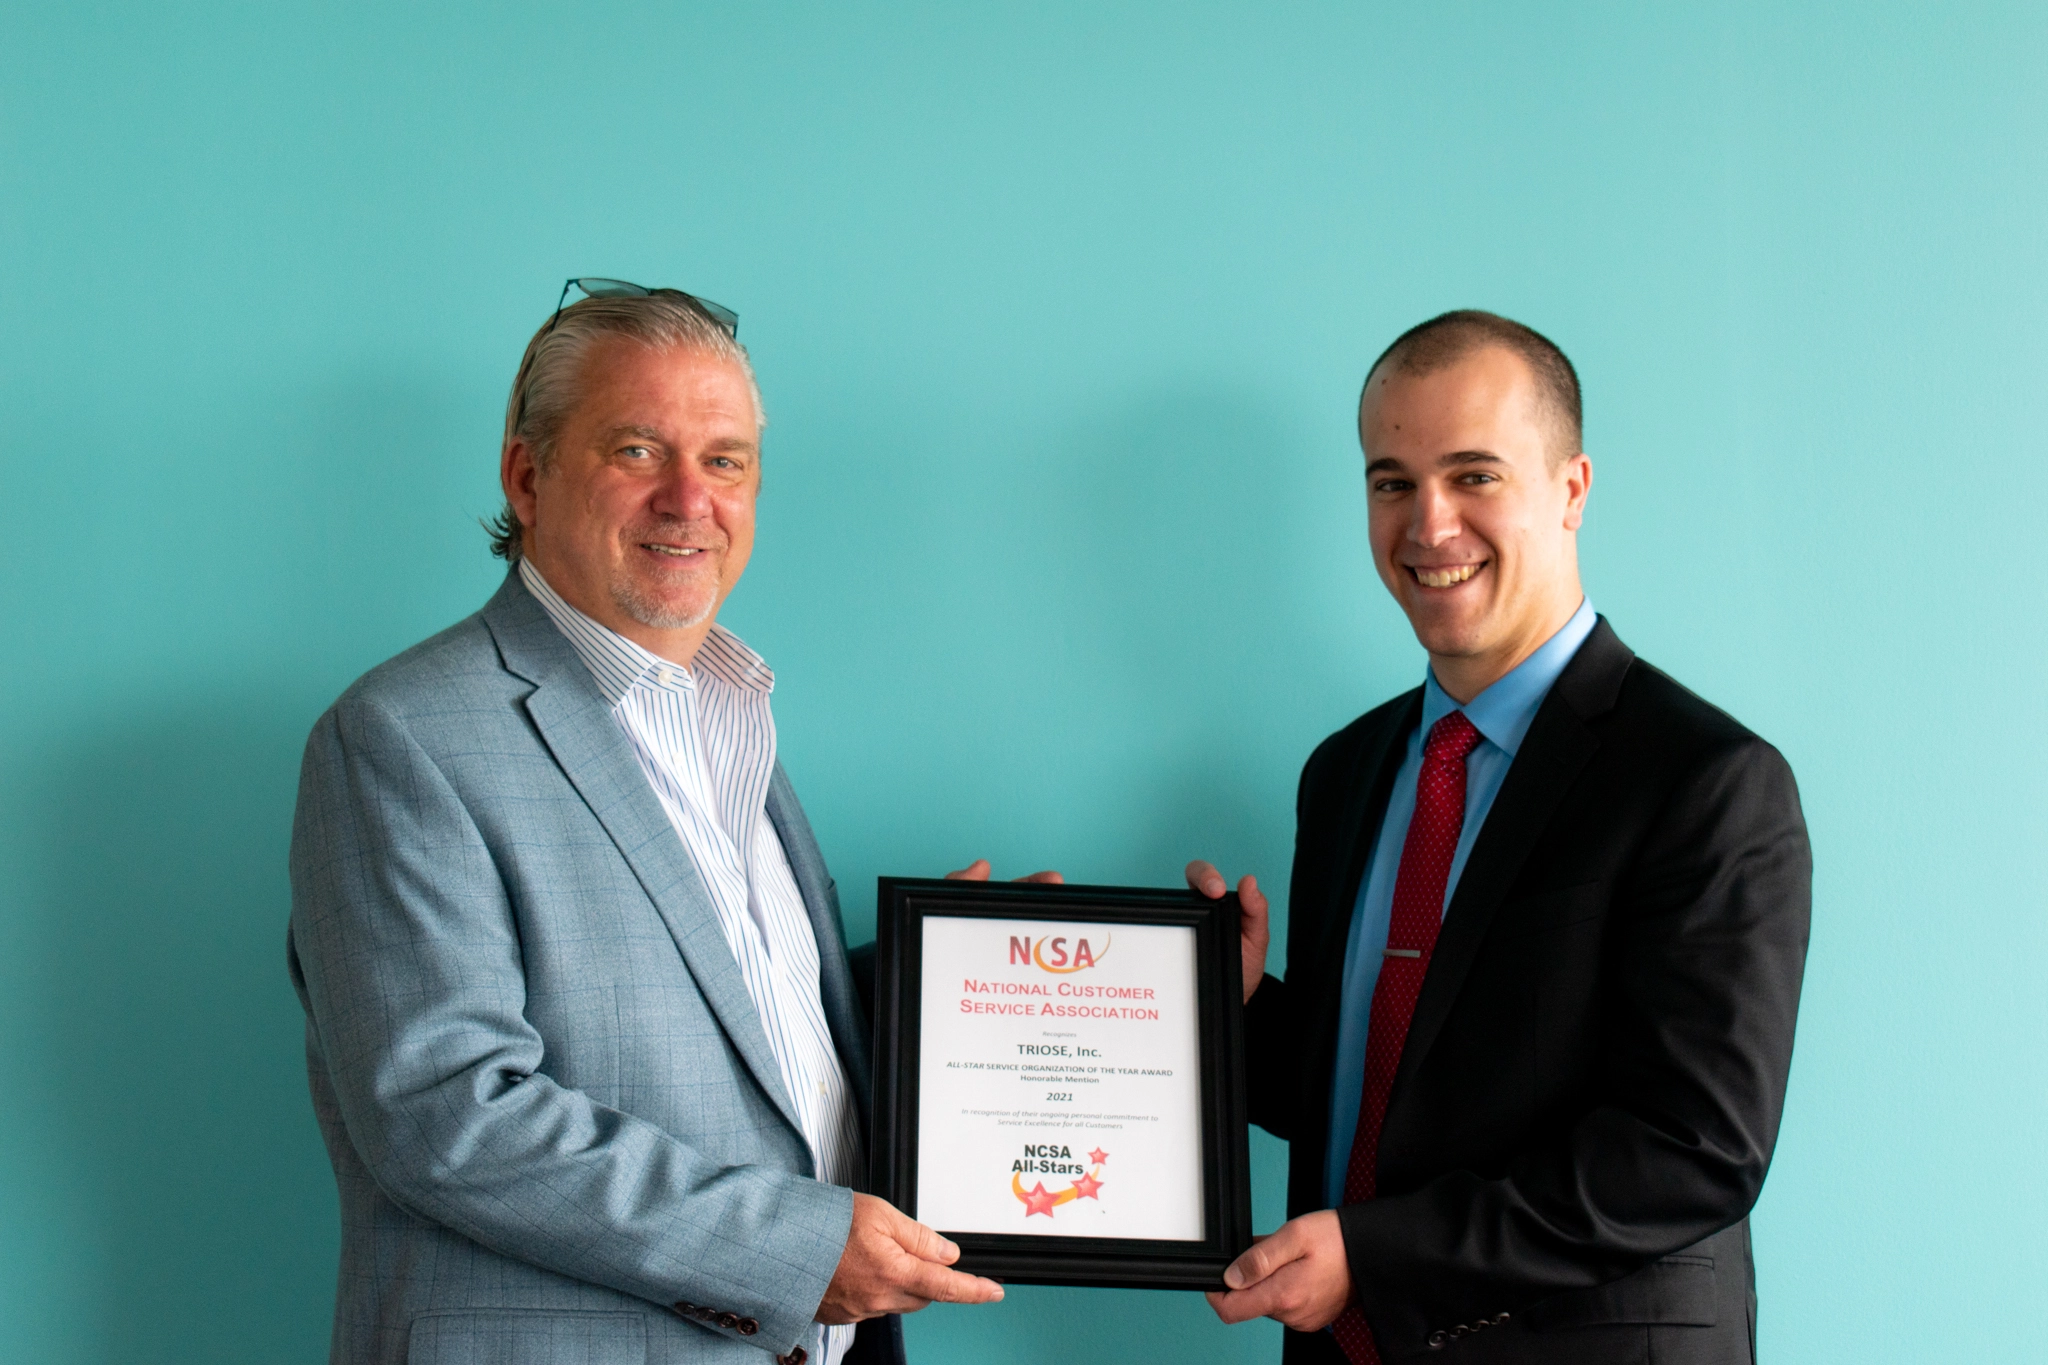 Gerry Romanelli, CCO of TRIOSE, receiving National Customer Service Association All-Star Award.